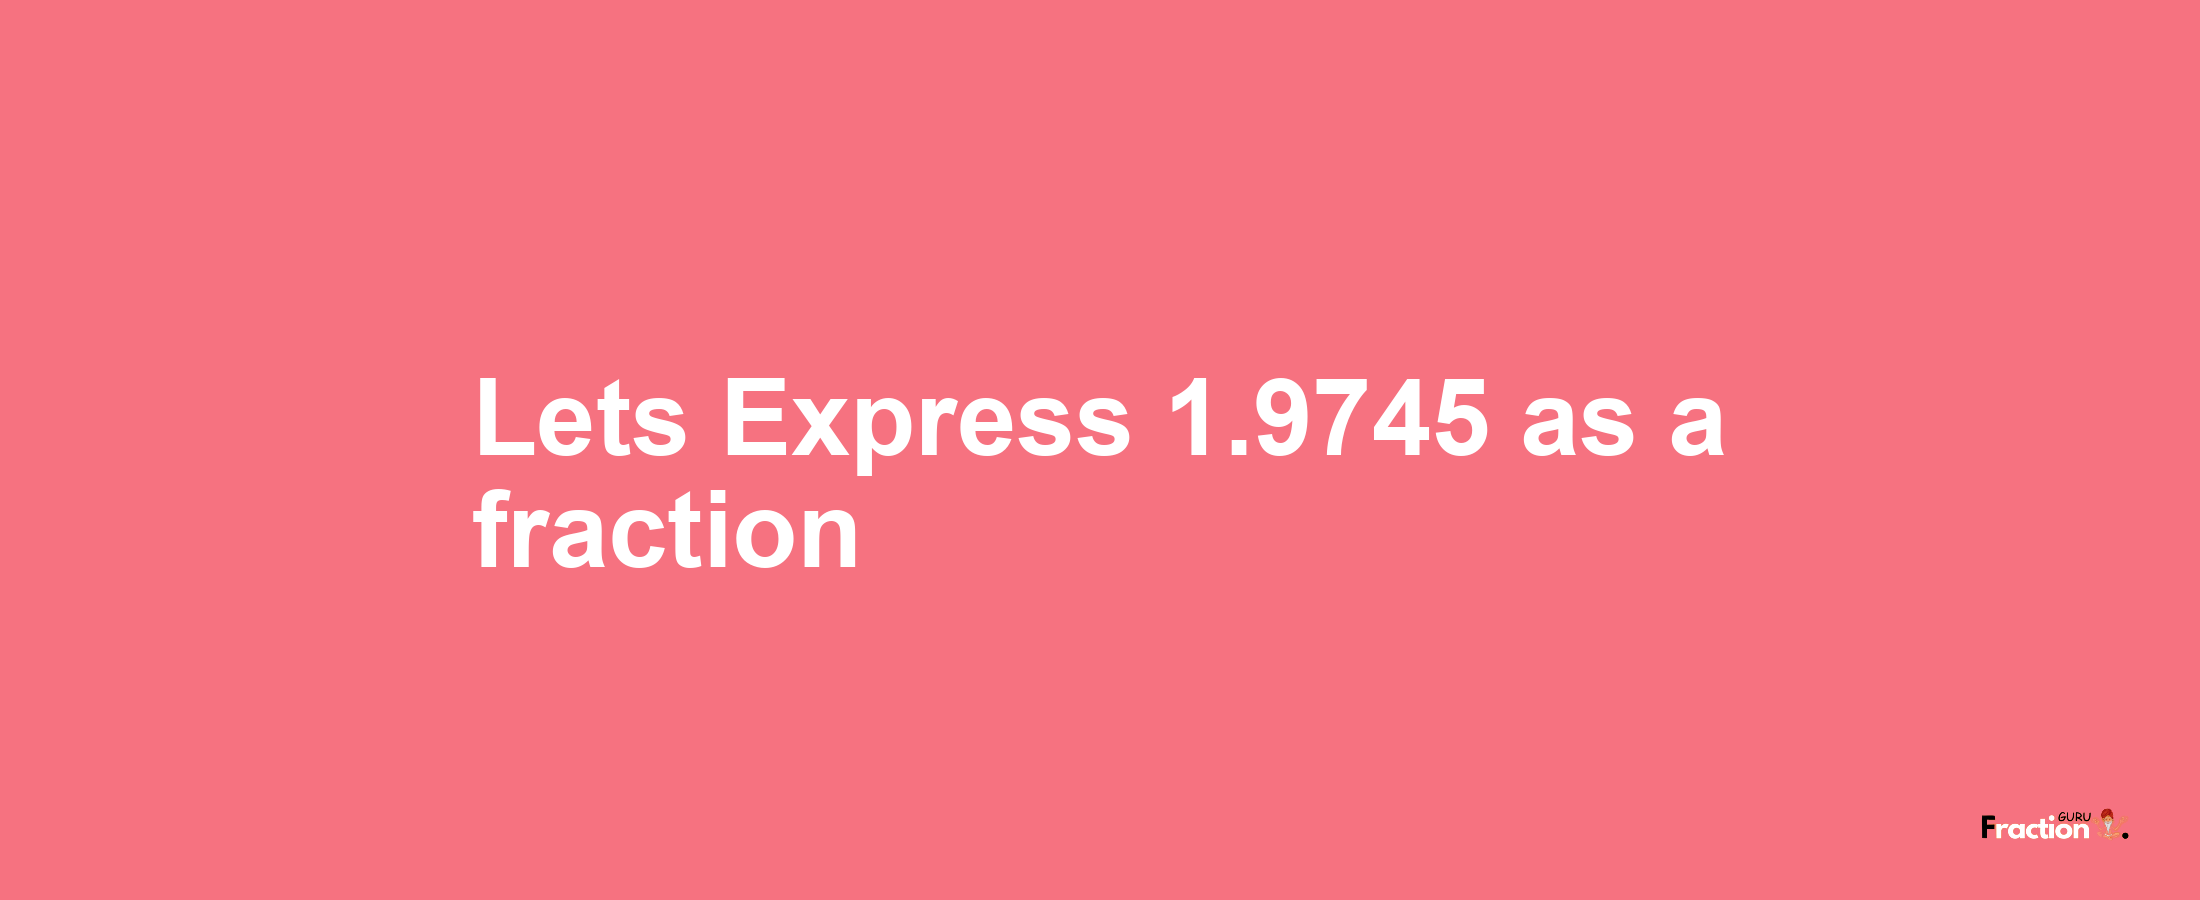 Lets Express 1.9745 as afraction